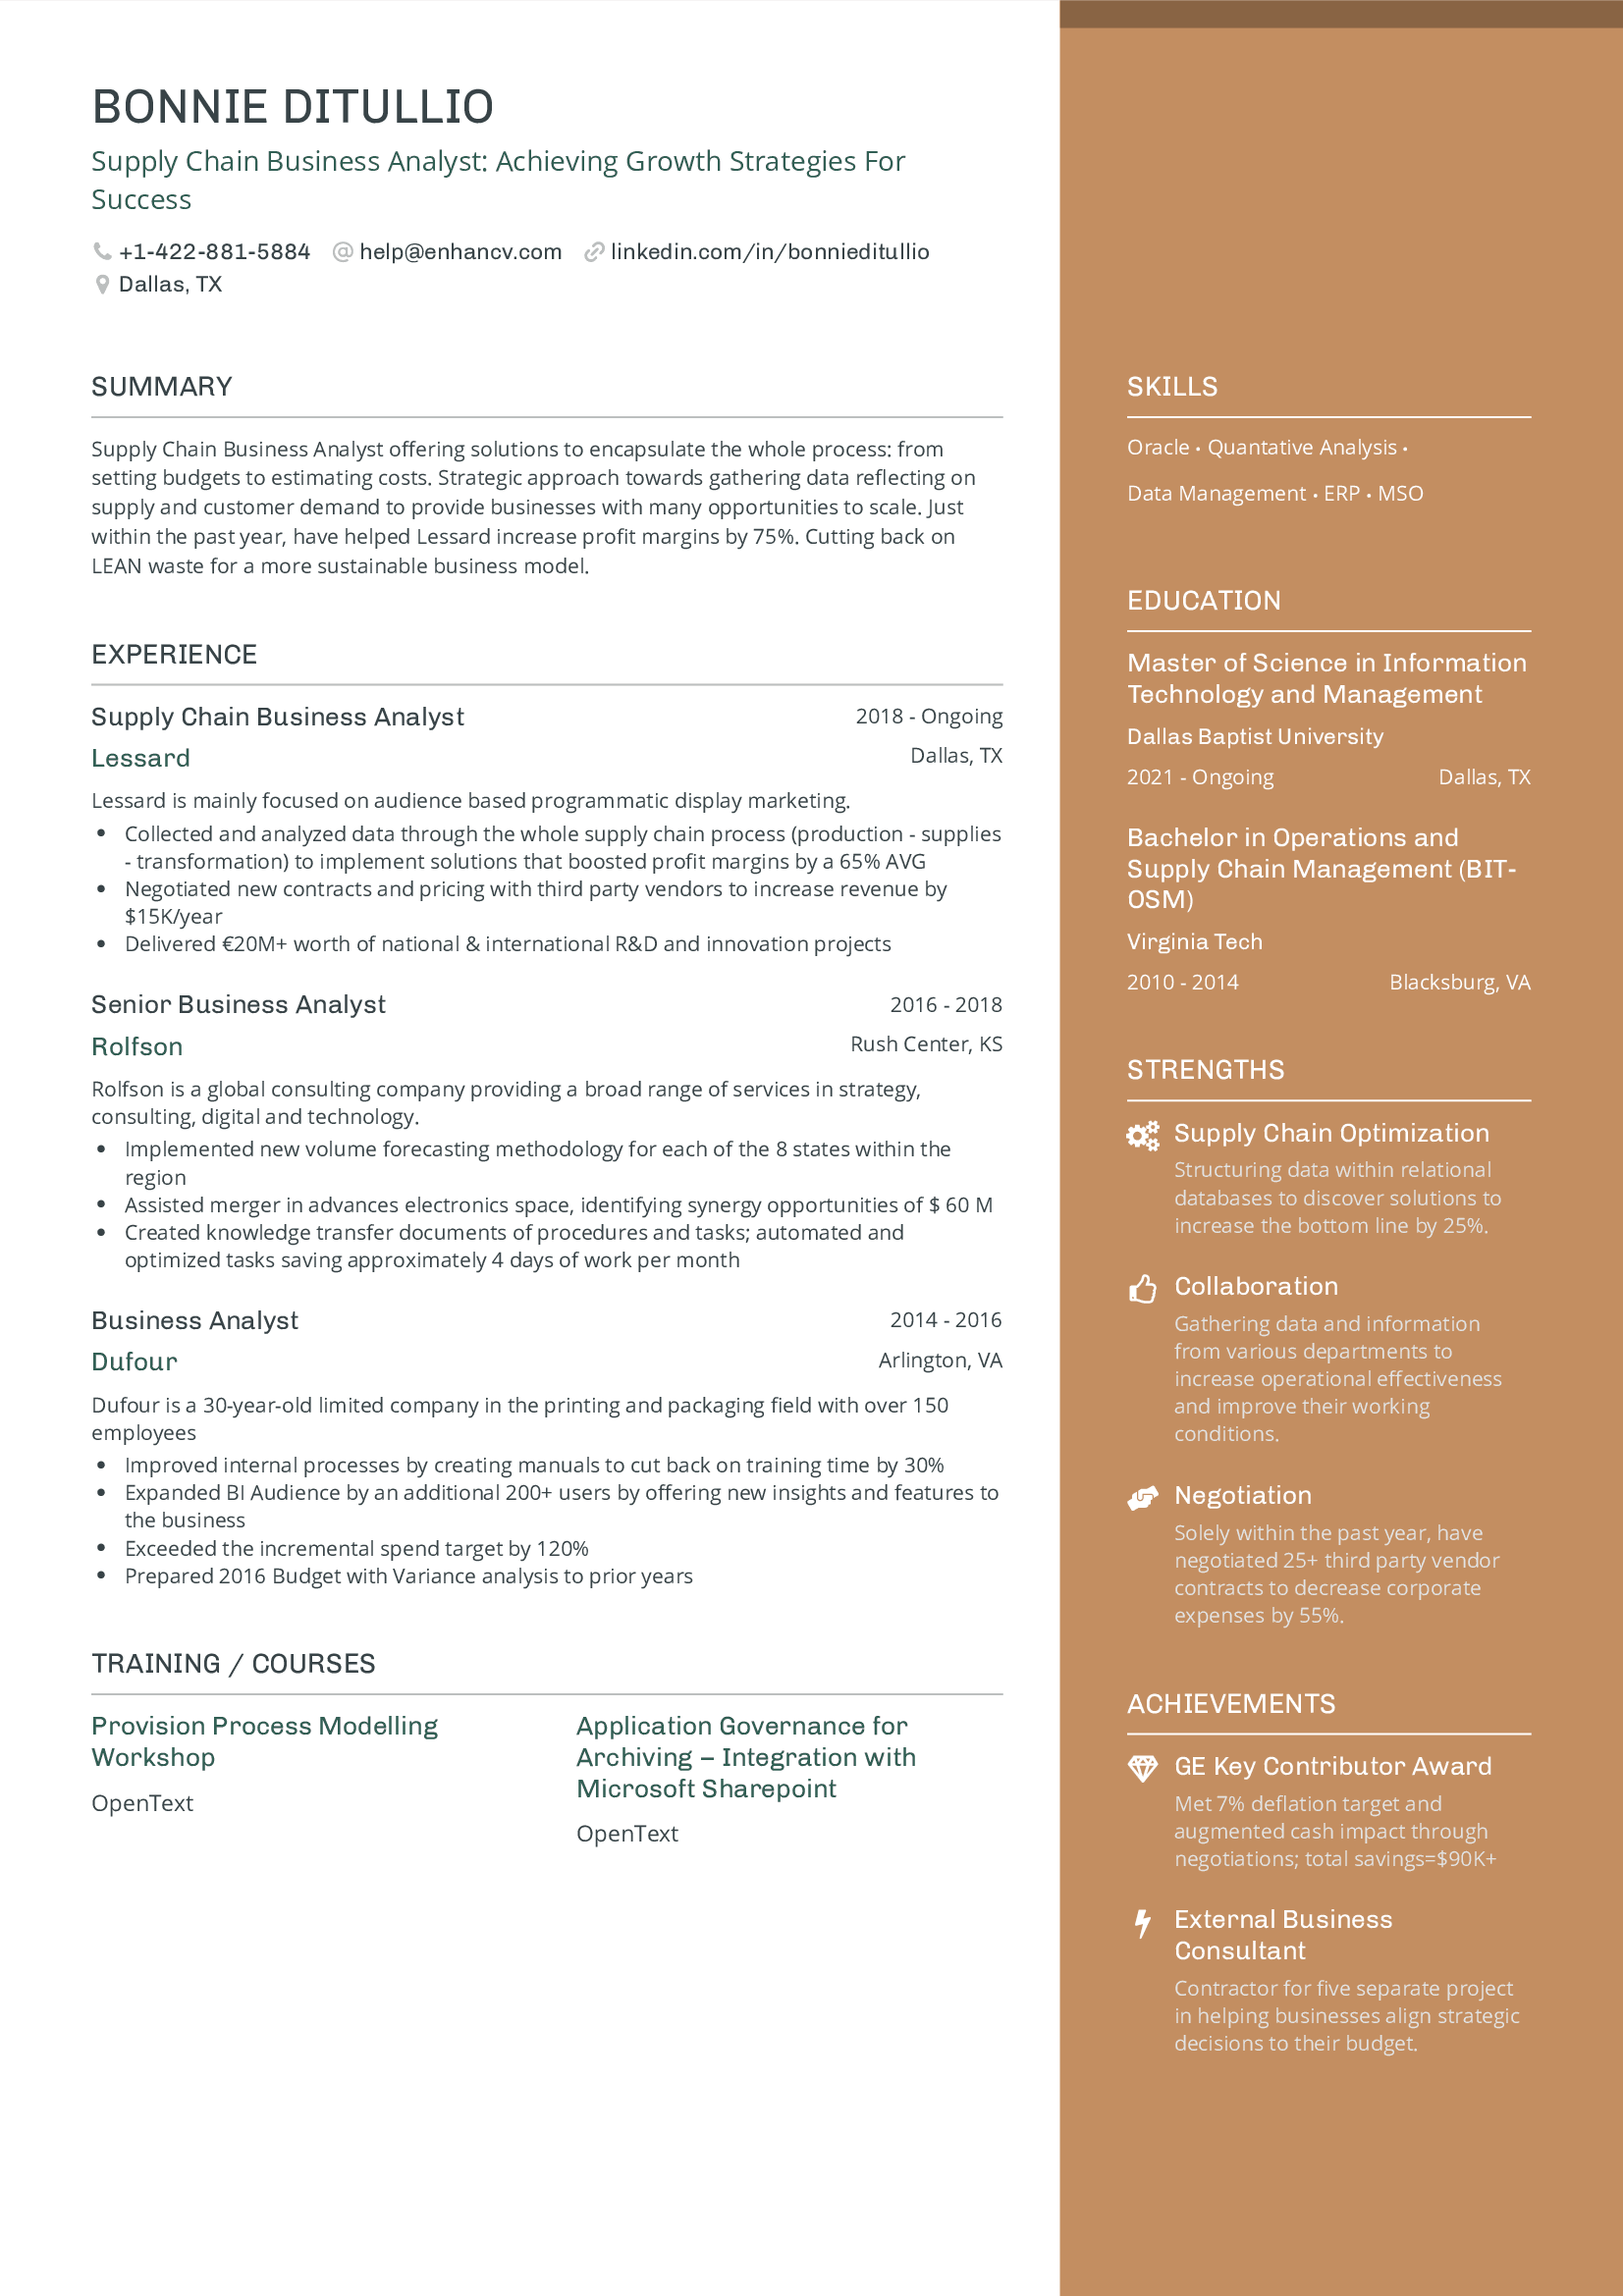 Supply Chain Business Analyst resume.png